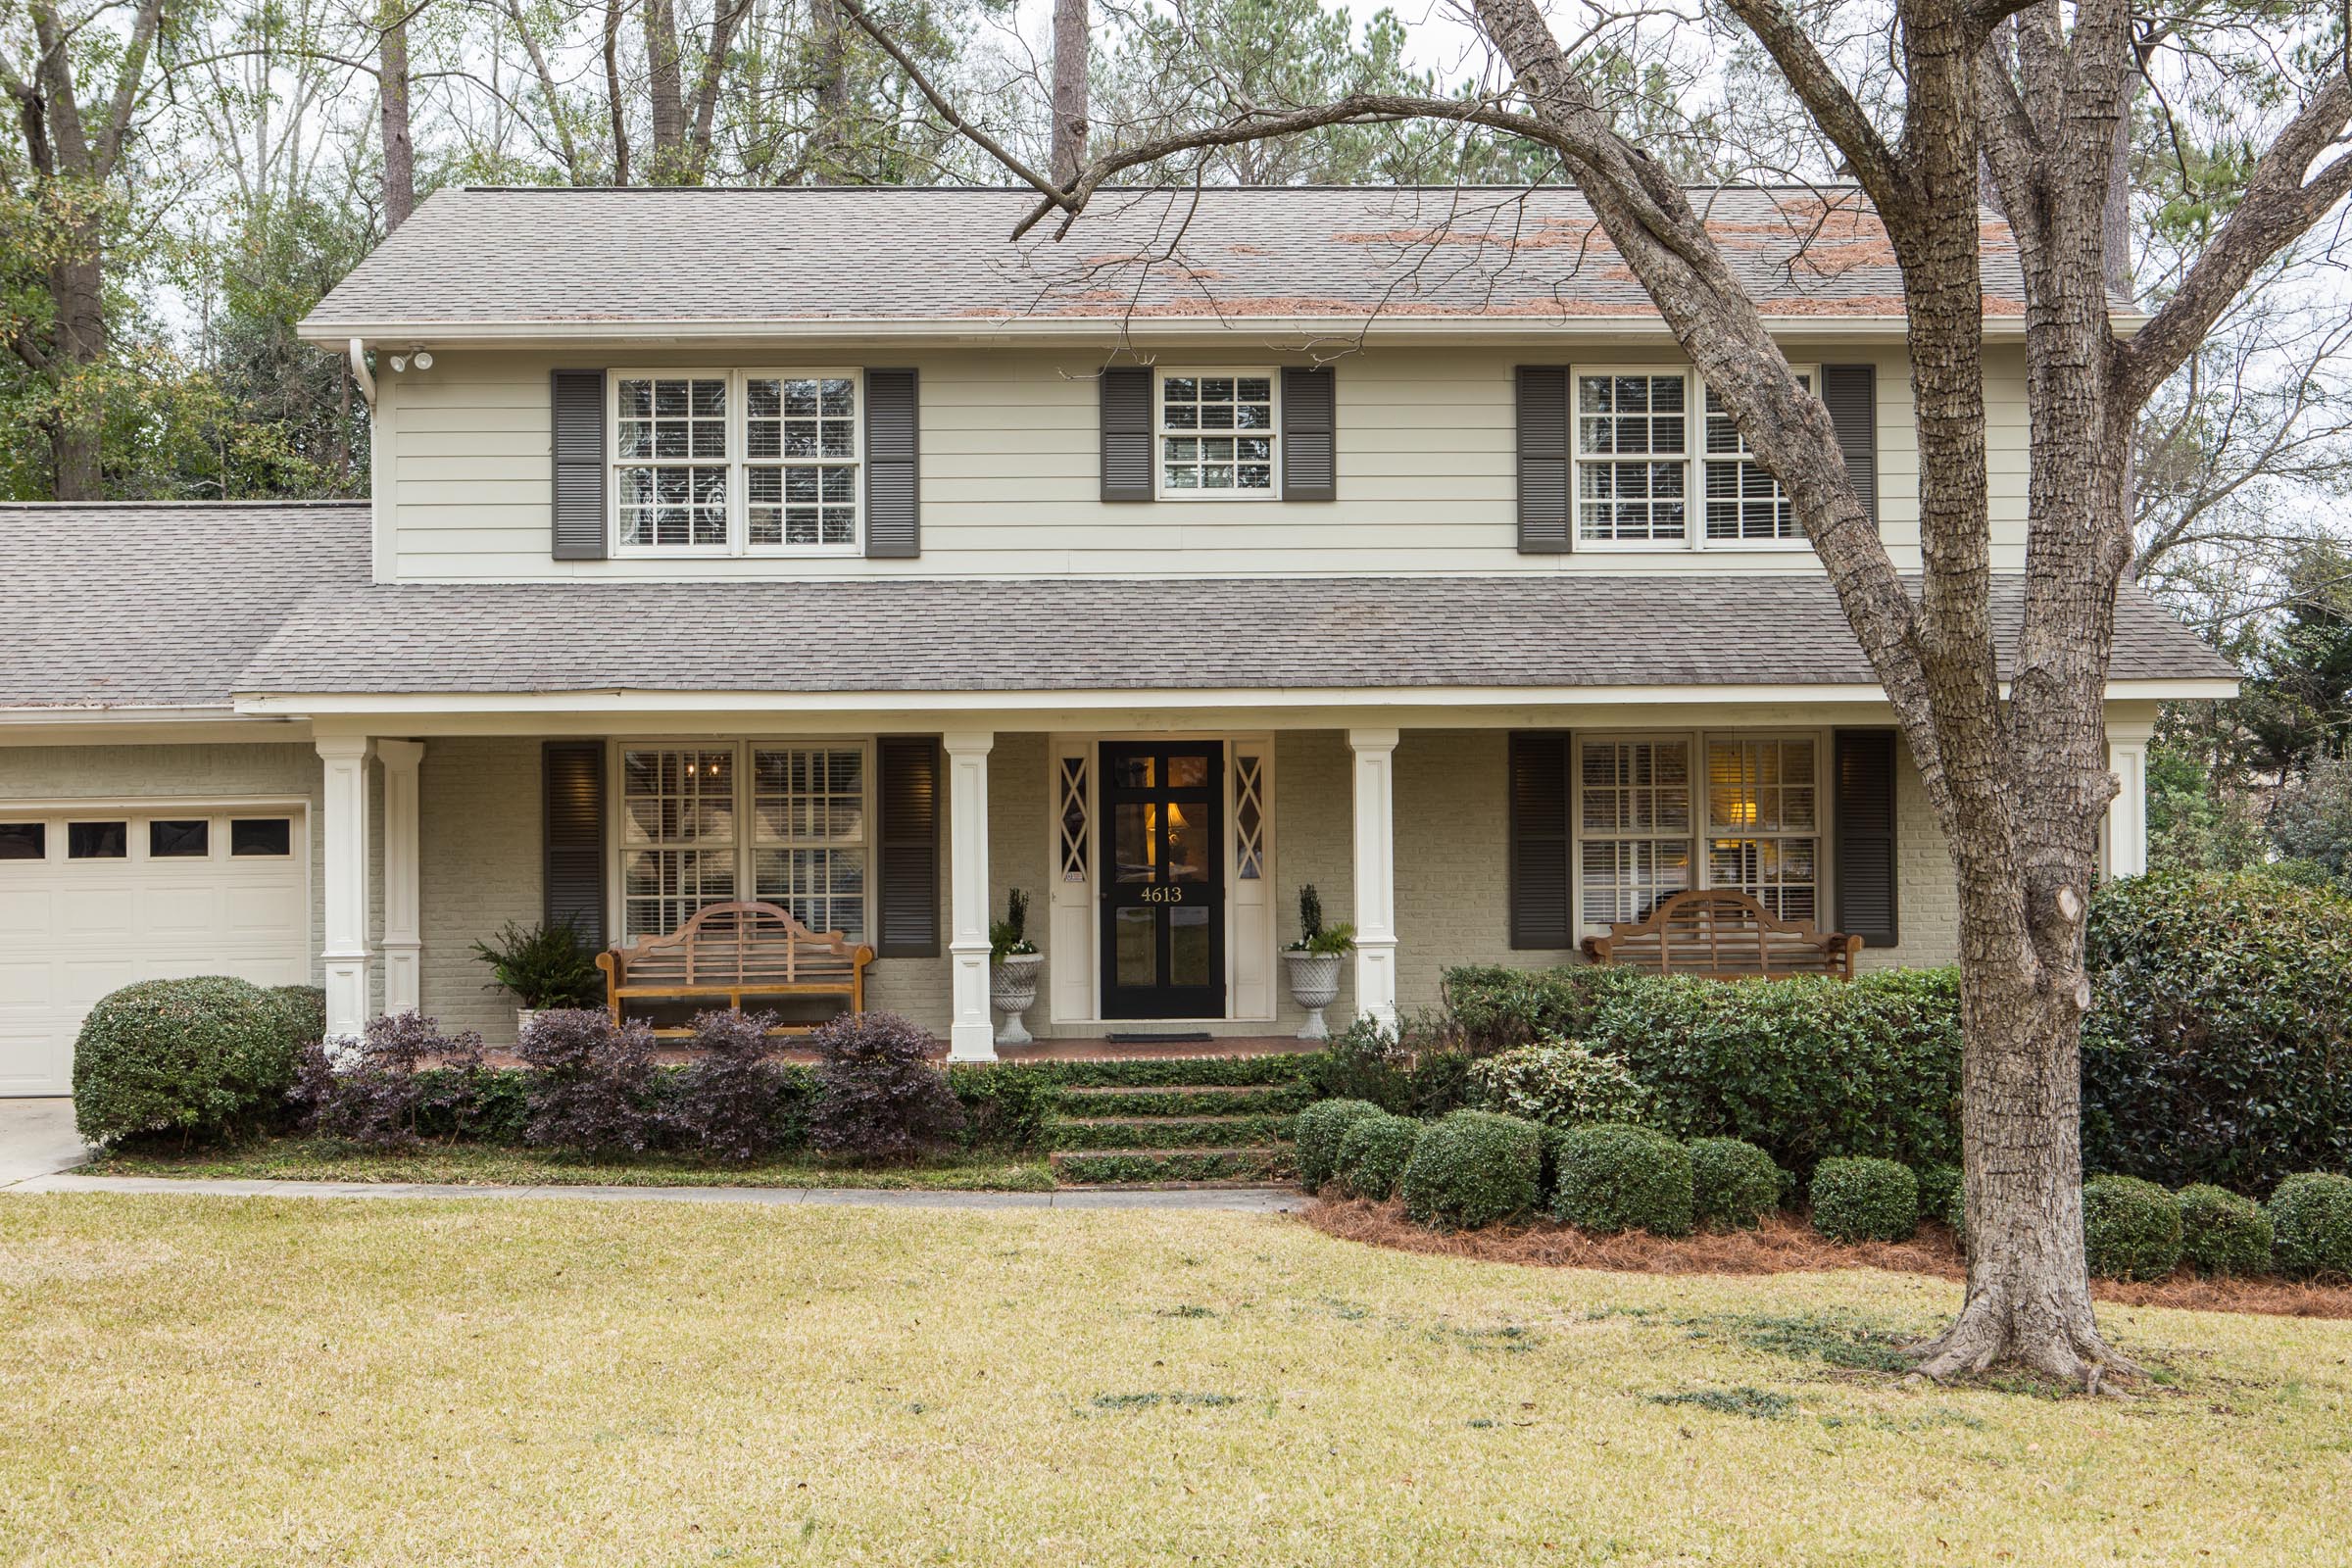 Carla and Michael Graf have enjoyed their exterior paint color scheme so much that they have not changed it since the purchase of their home in 2004. The palette of dark khaki, off white, and Charleston green is timeless.